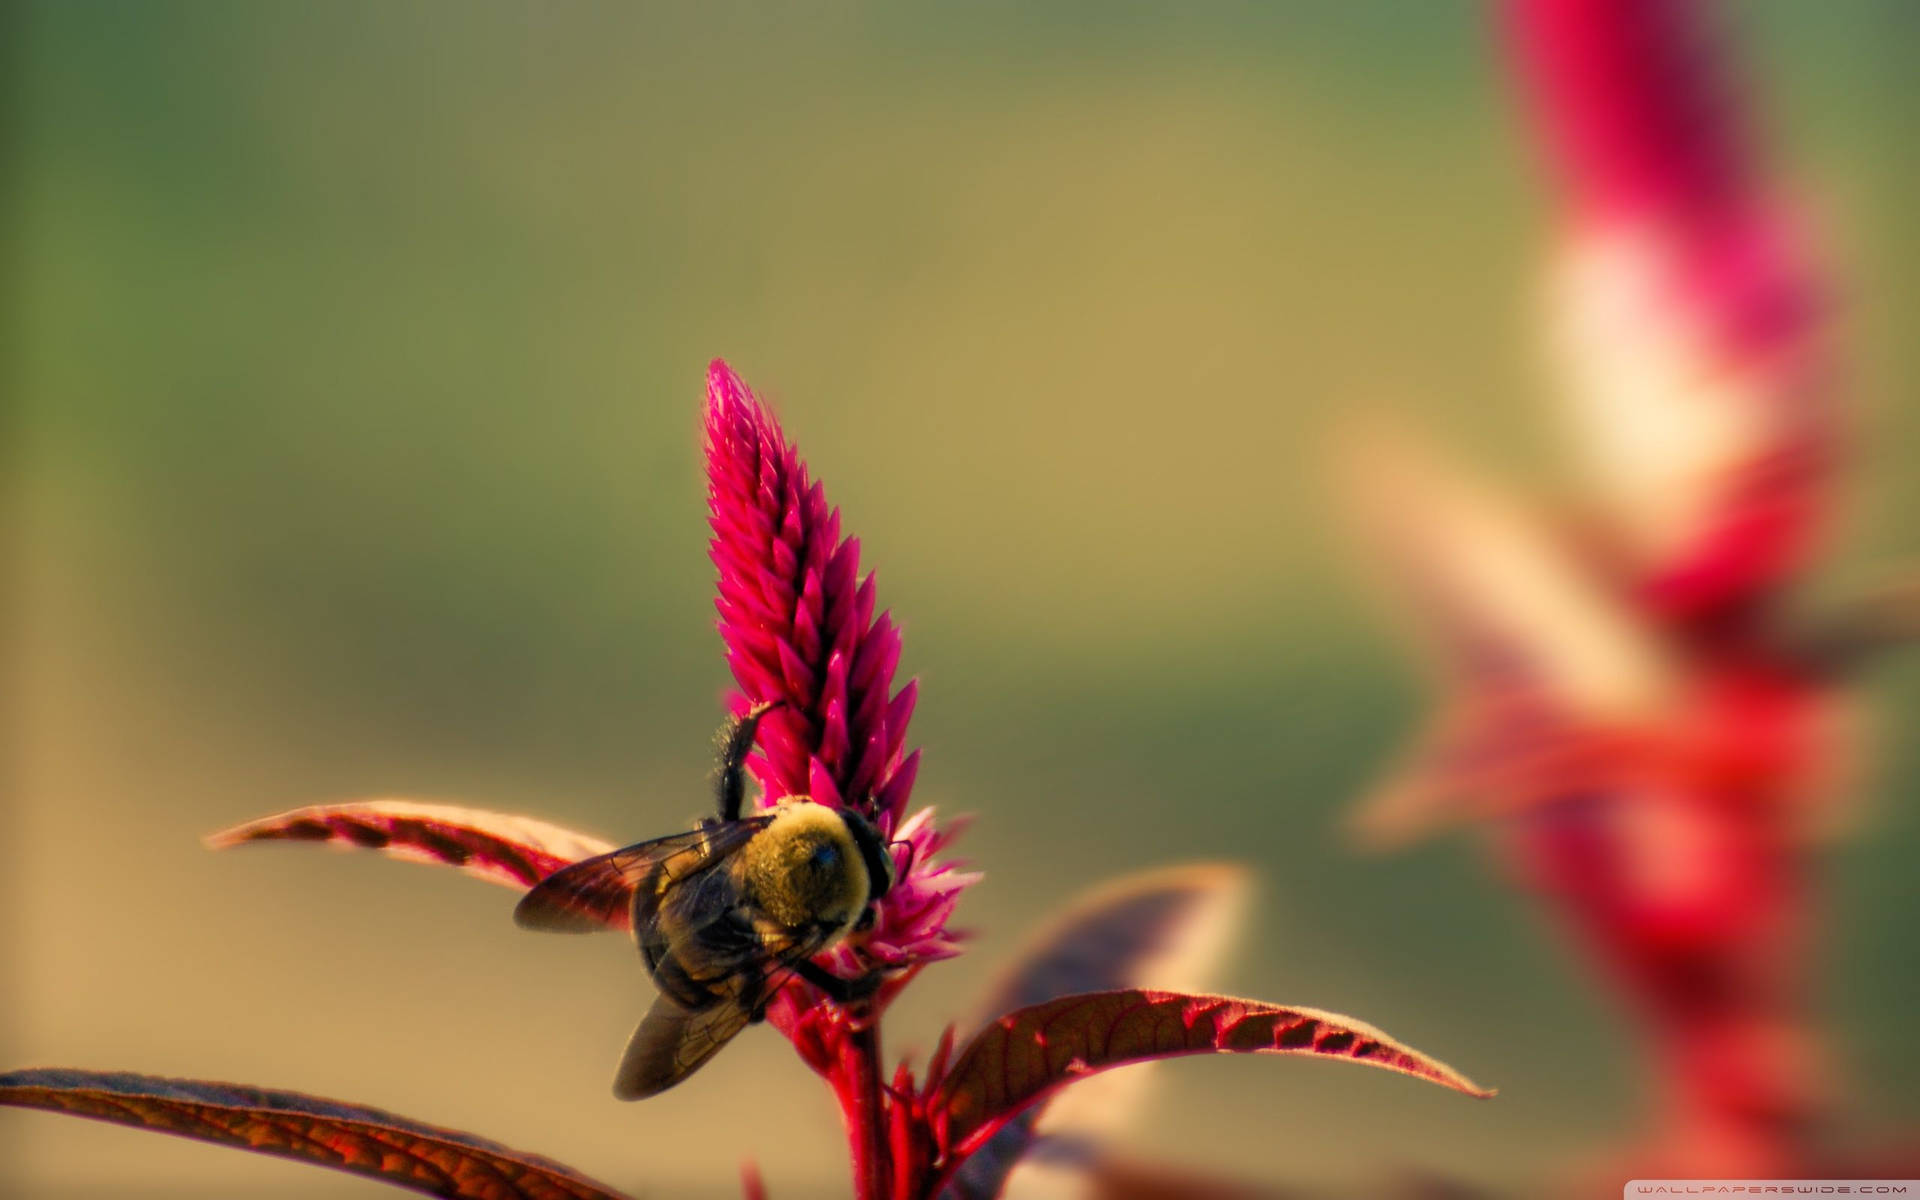 Insect Bumblebee On Red Flower